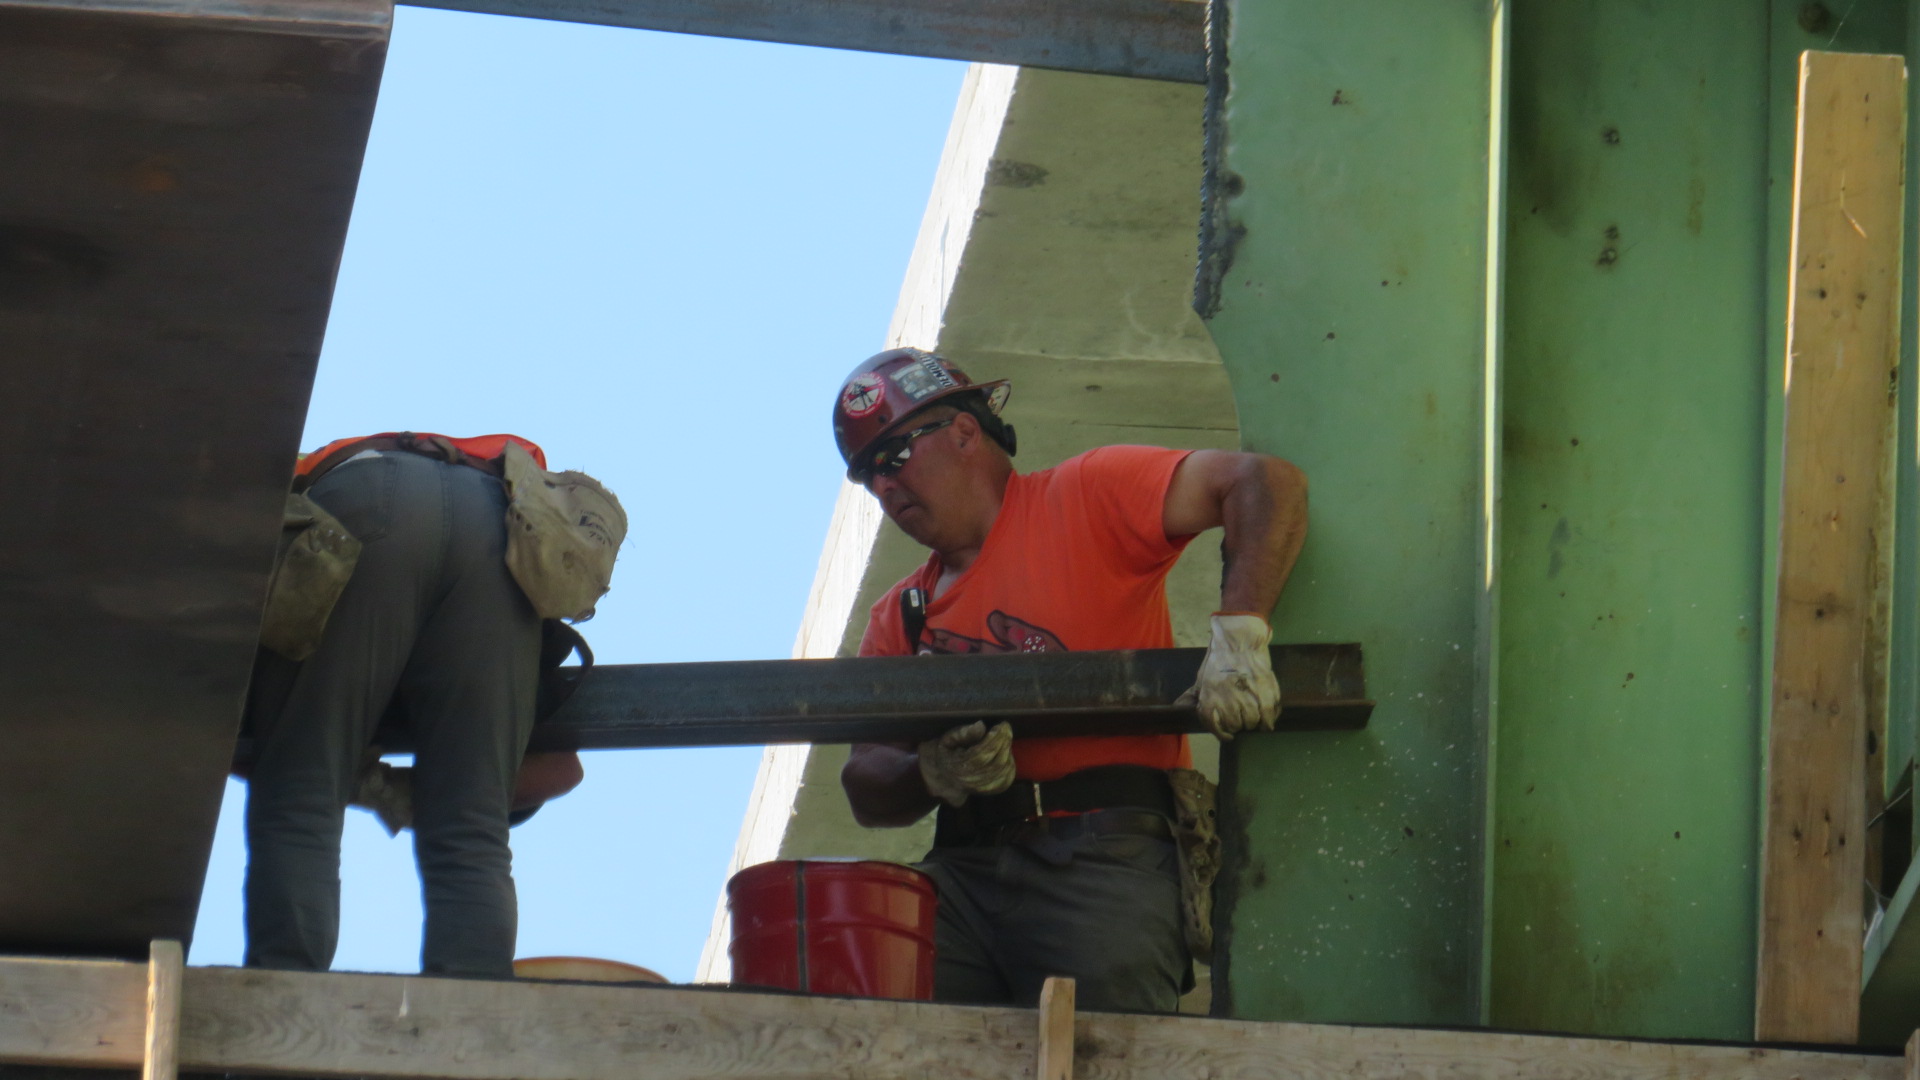 Installing the bracing between the new and existing girders